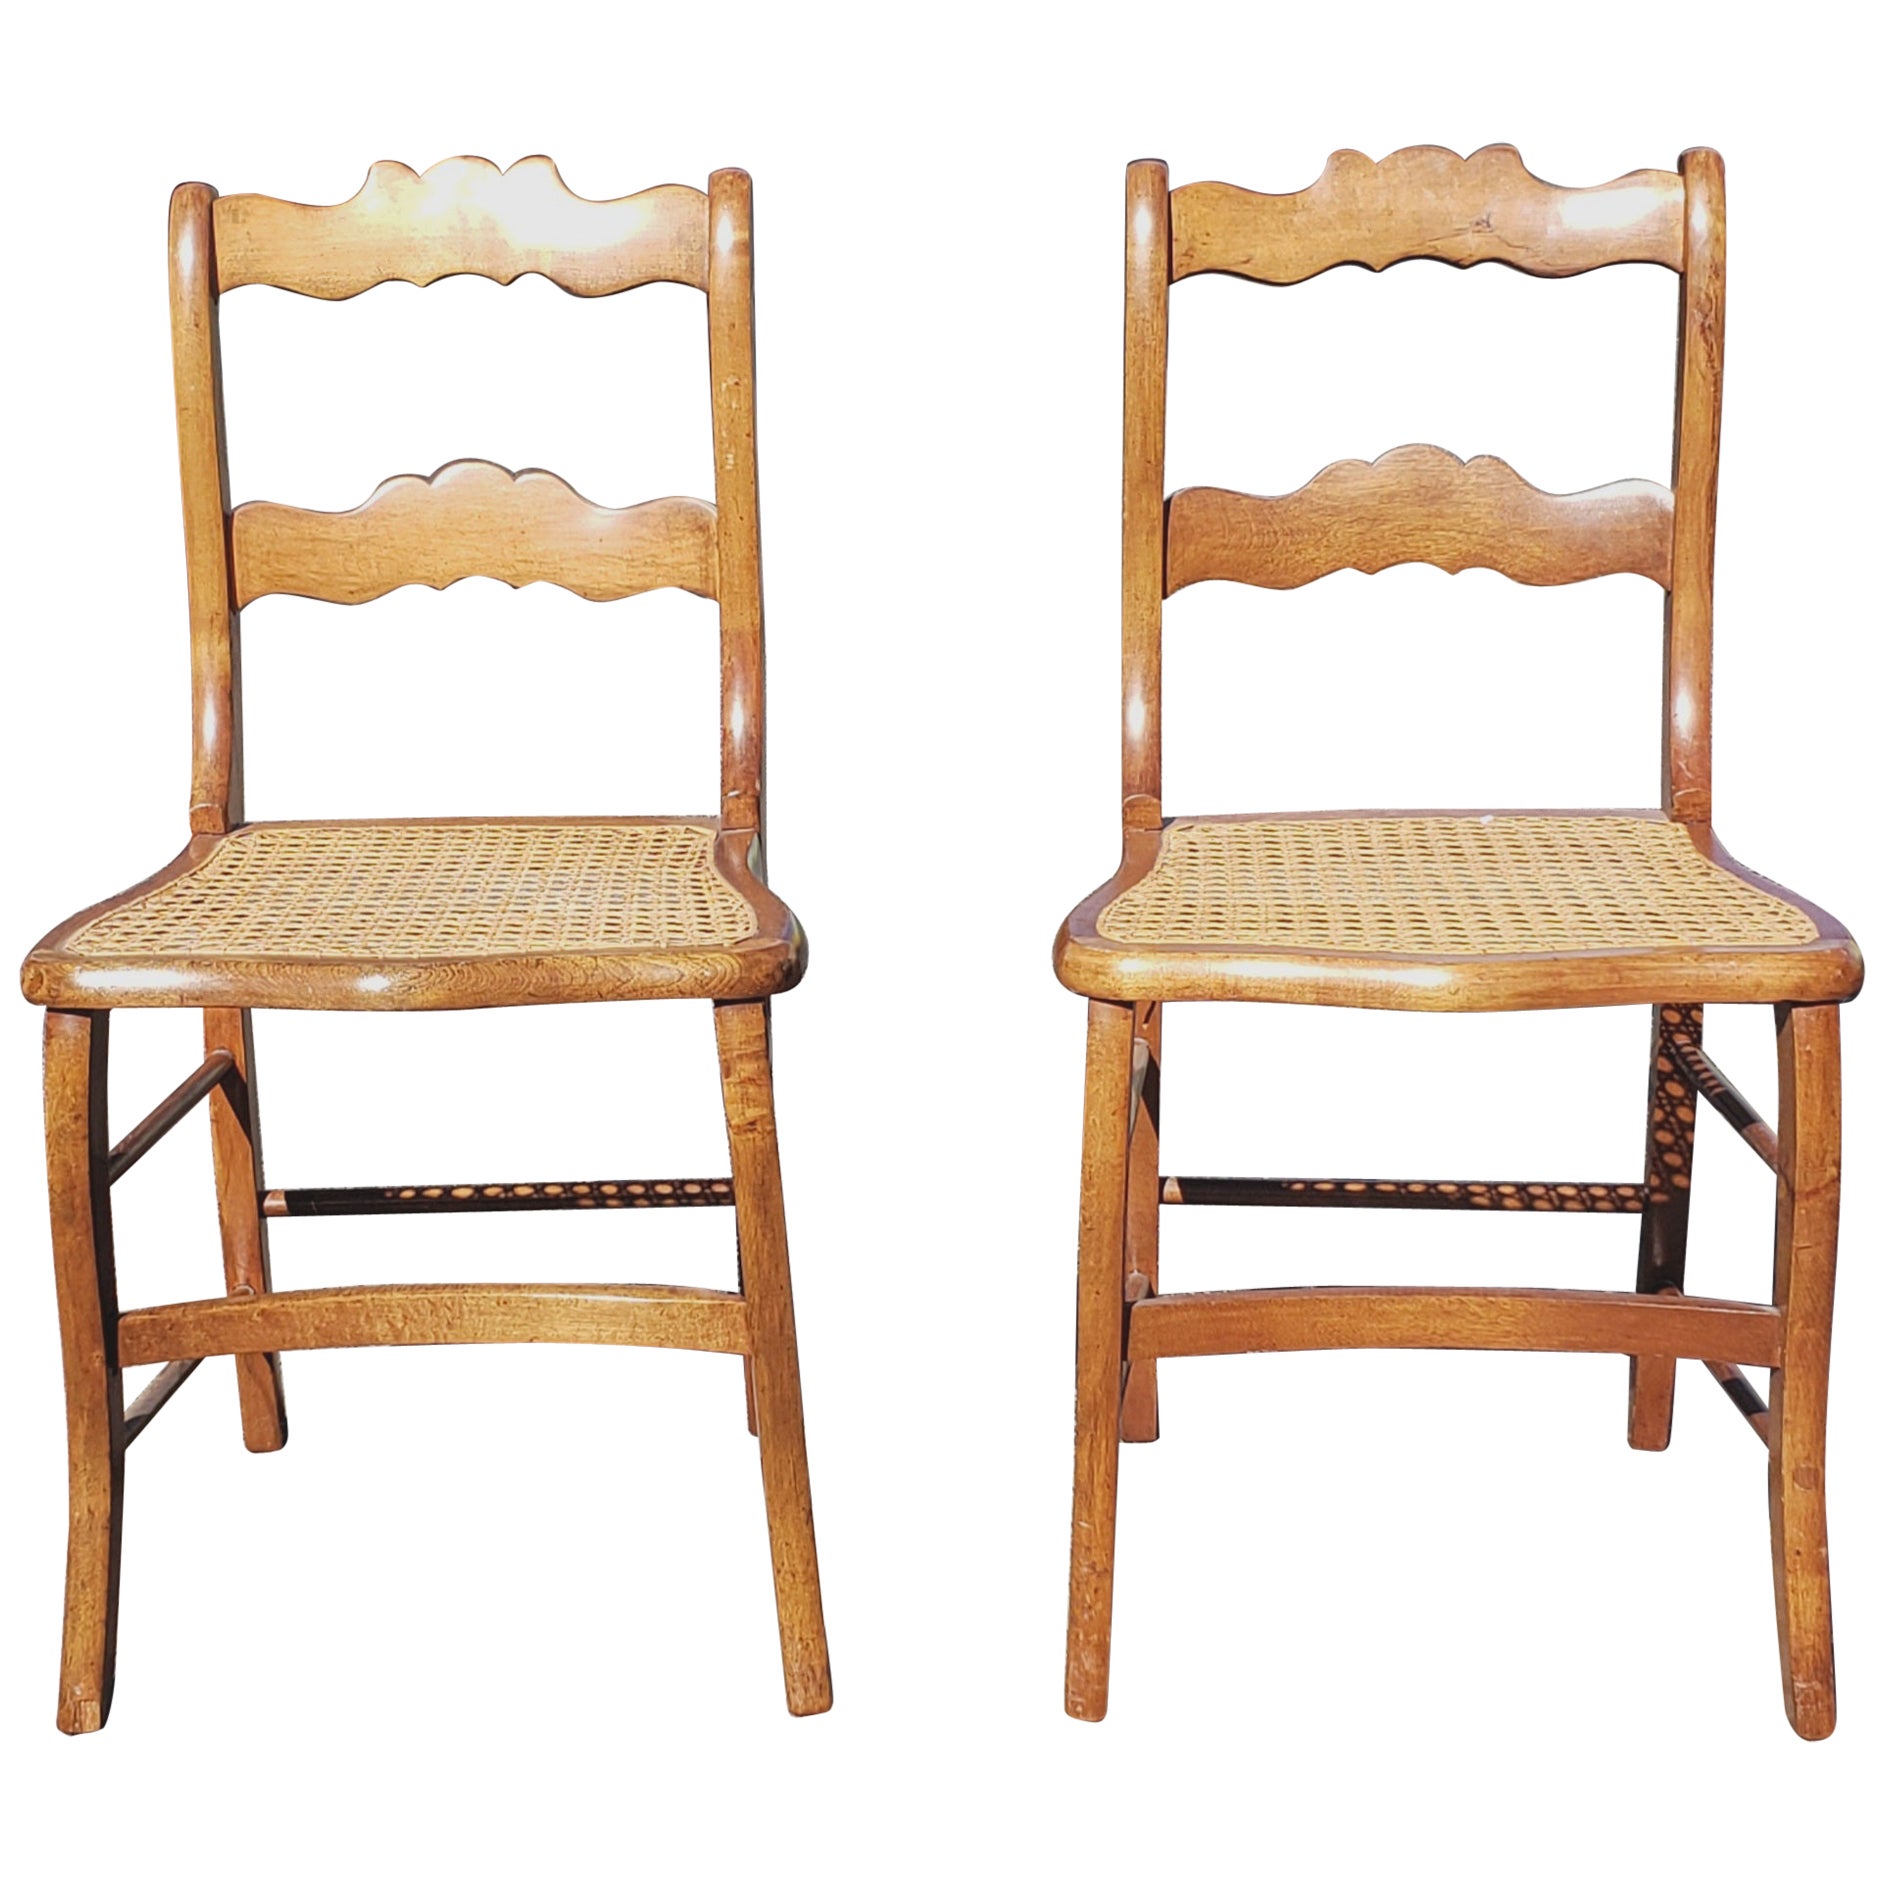 Early American Ladder Back Maple and Cane Seat Chairs, a Pair, circa 1880s